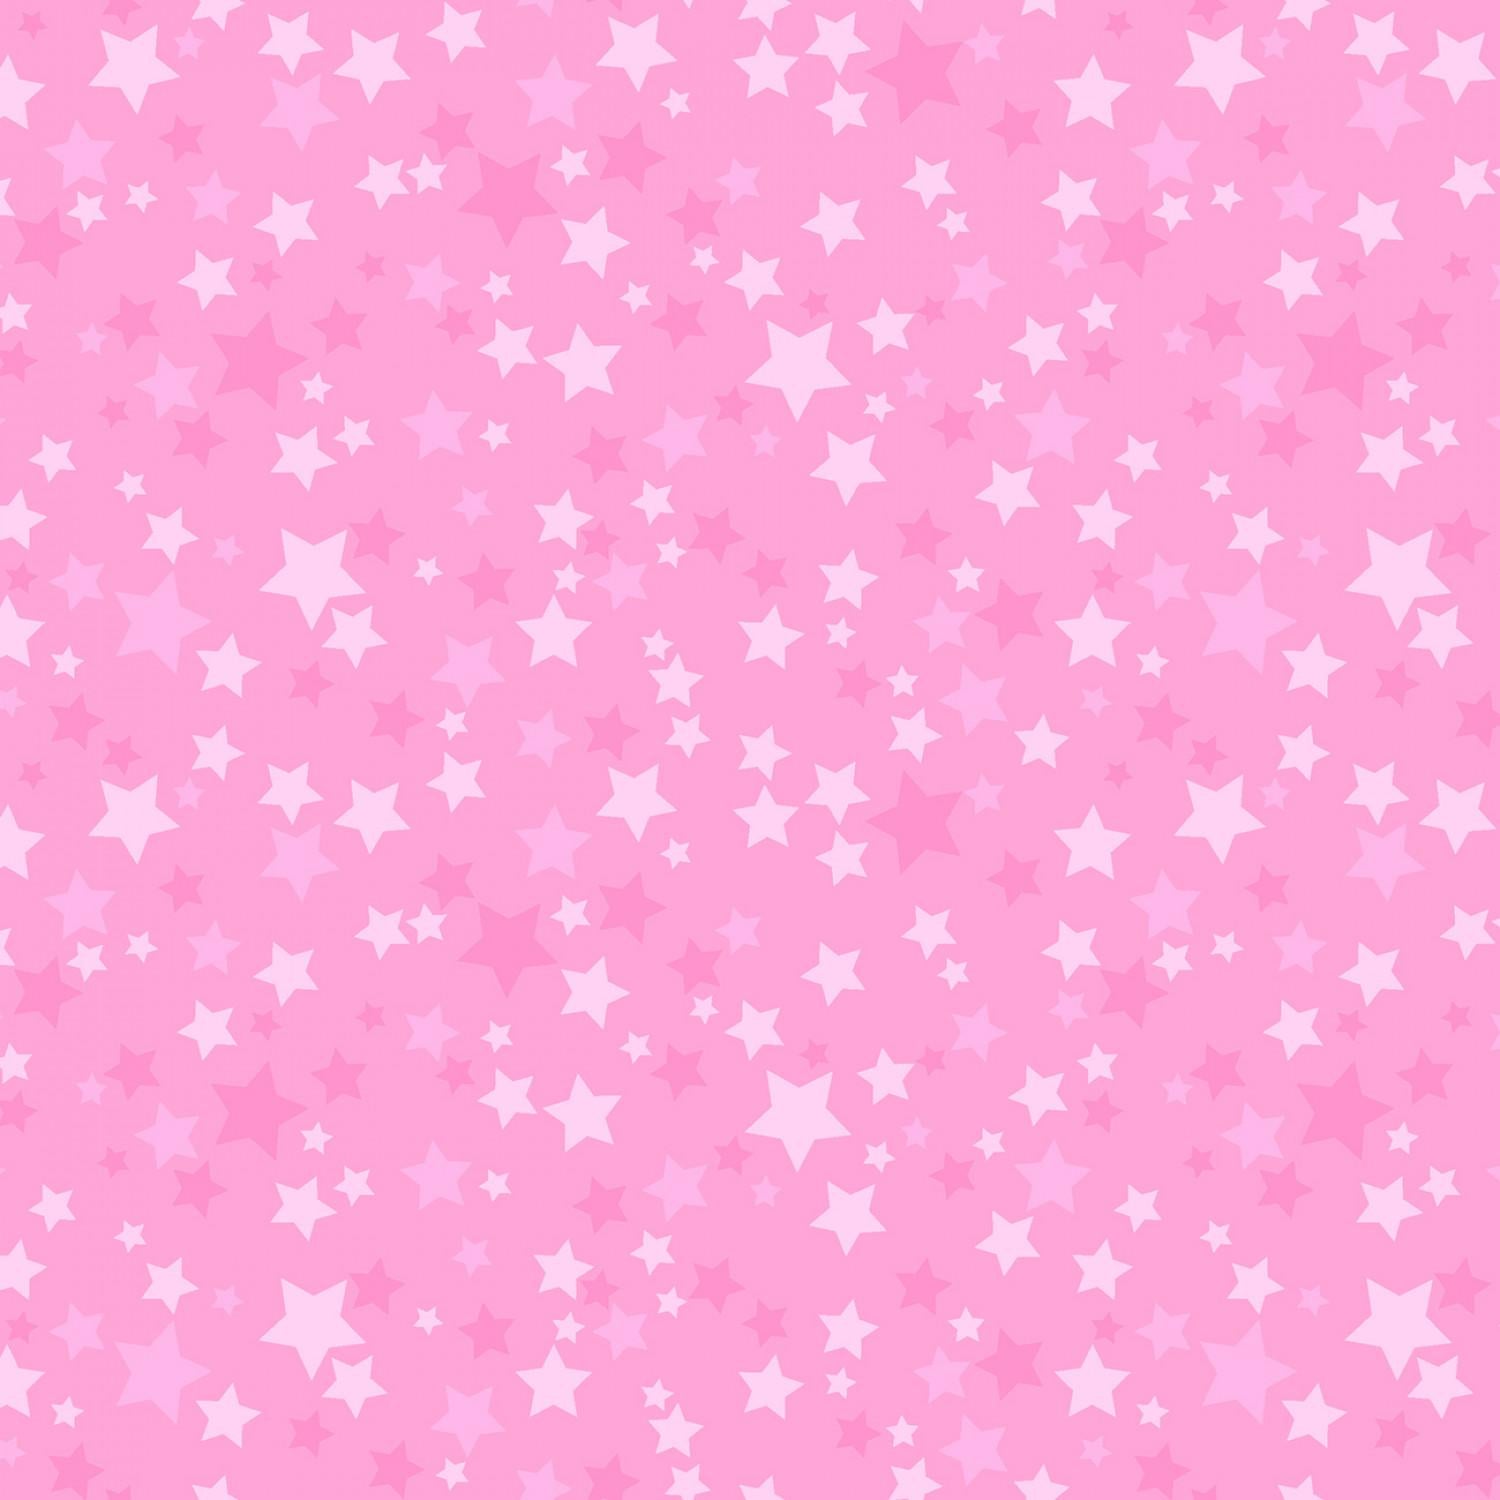 Playtime Flannel - Stars - Pink - MASF10692-P